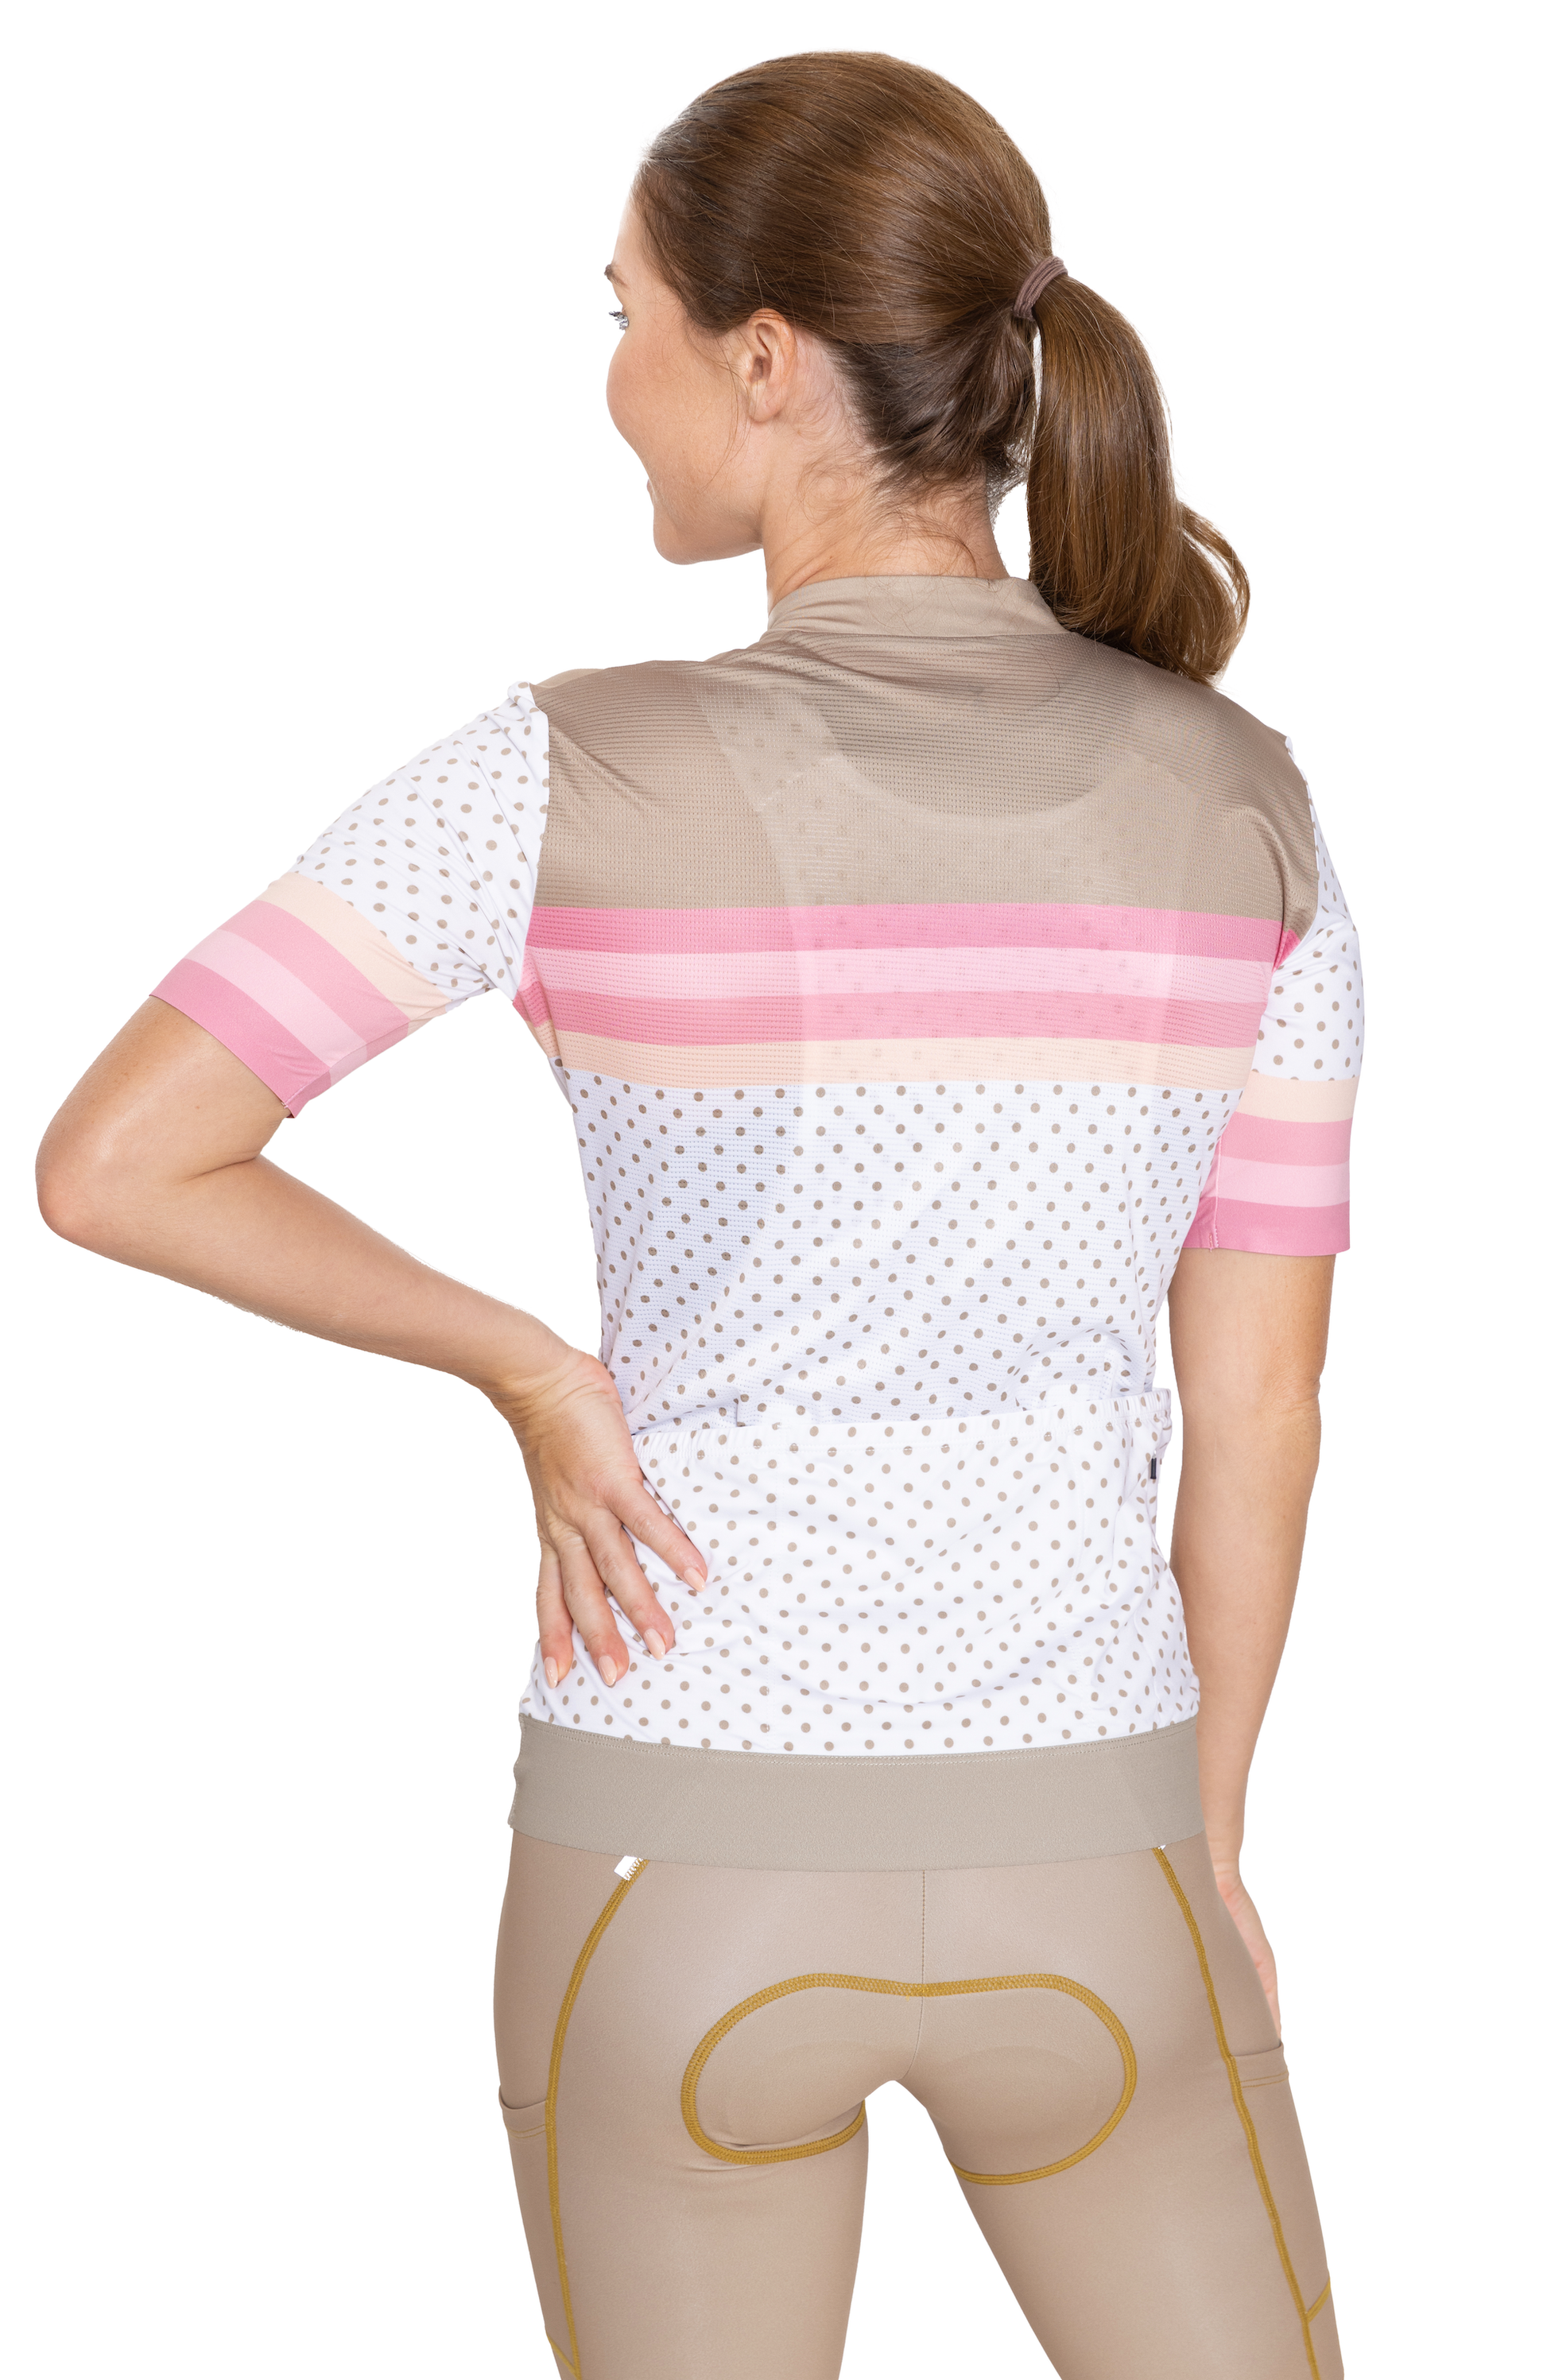 Coeur Sports Cycling Jersey 31 Flavors Women's Cycling Jersey